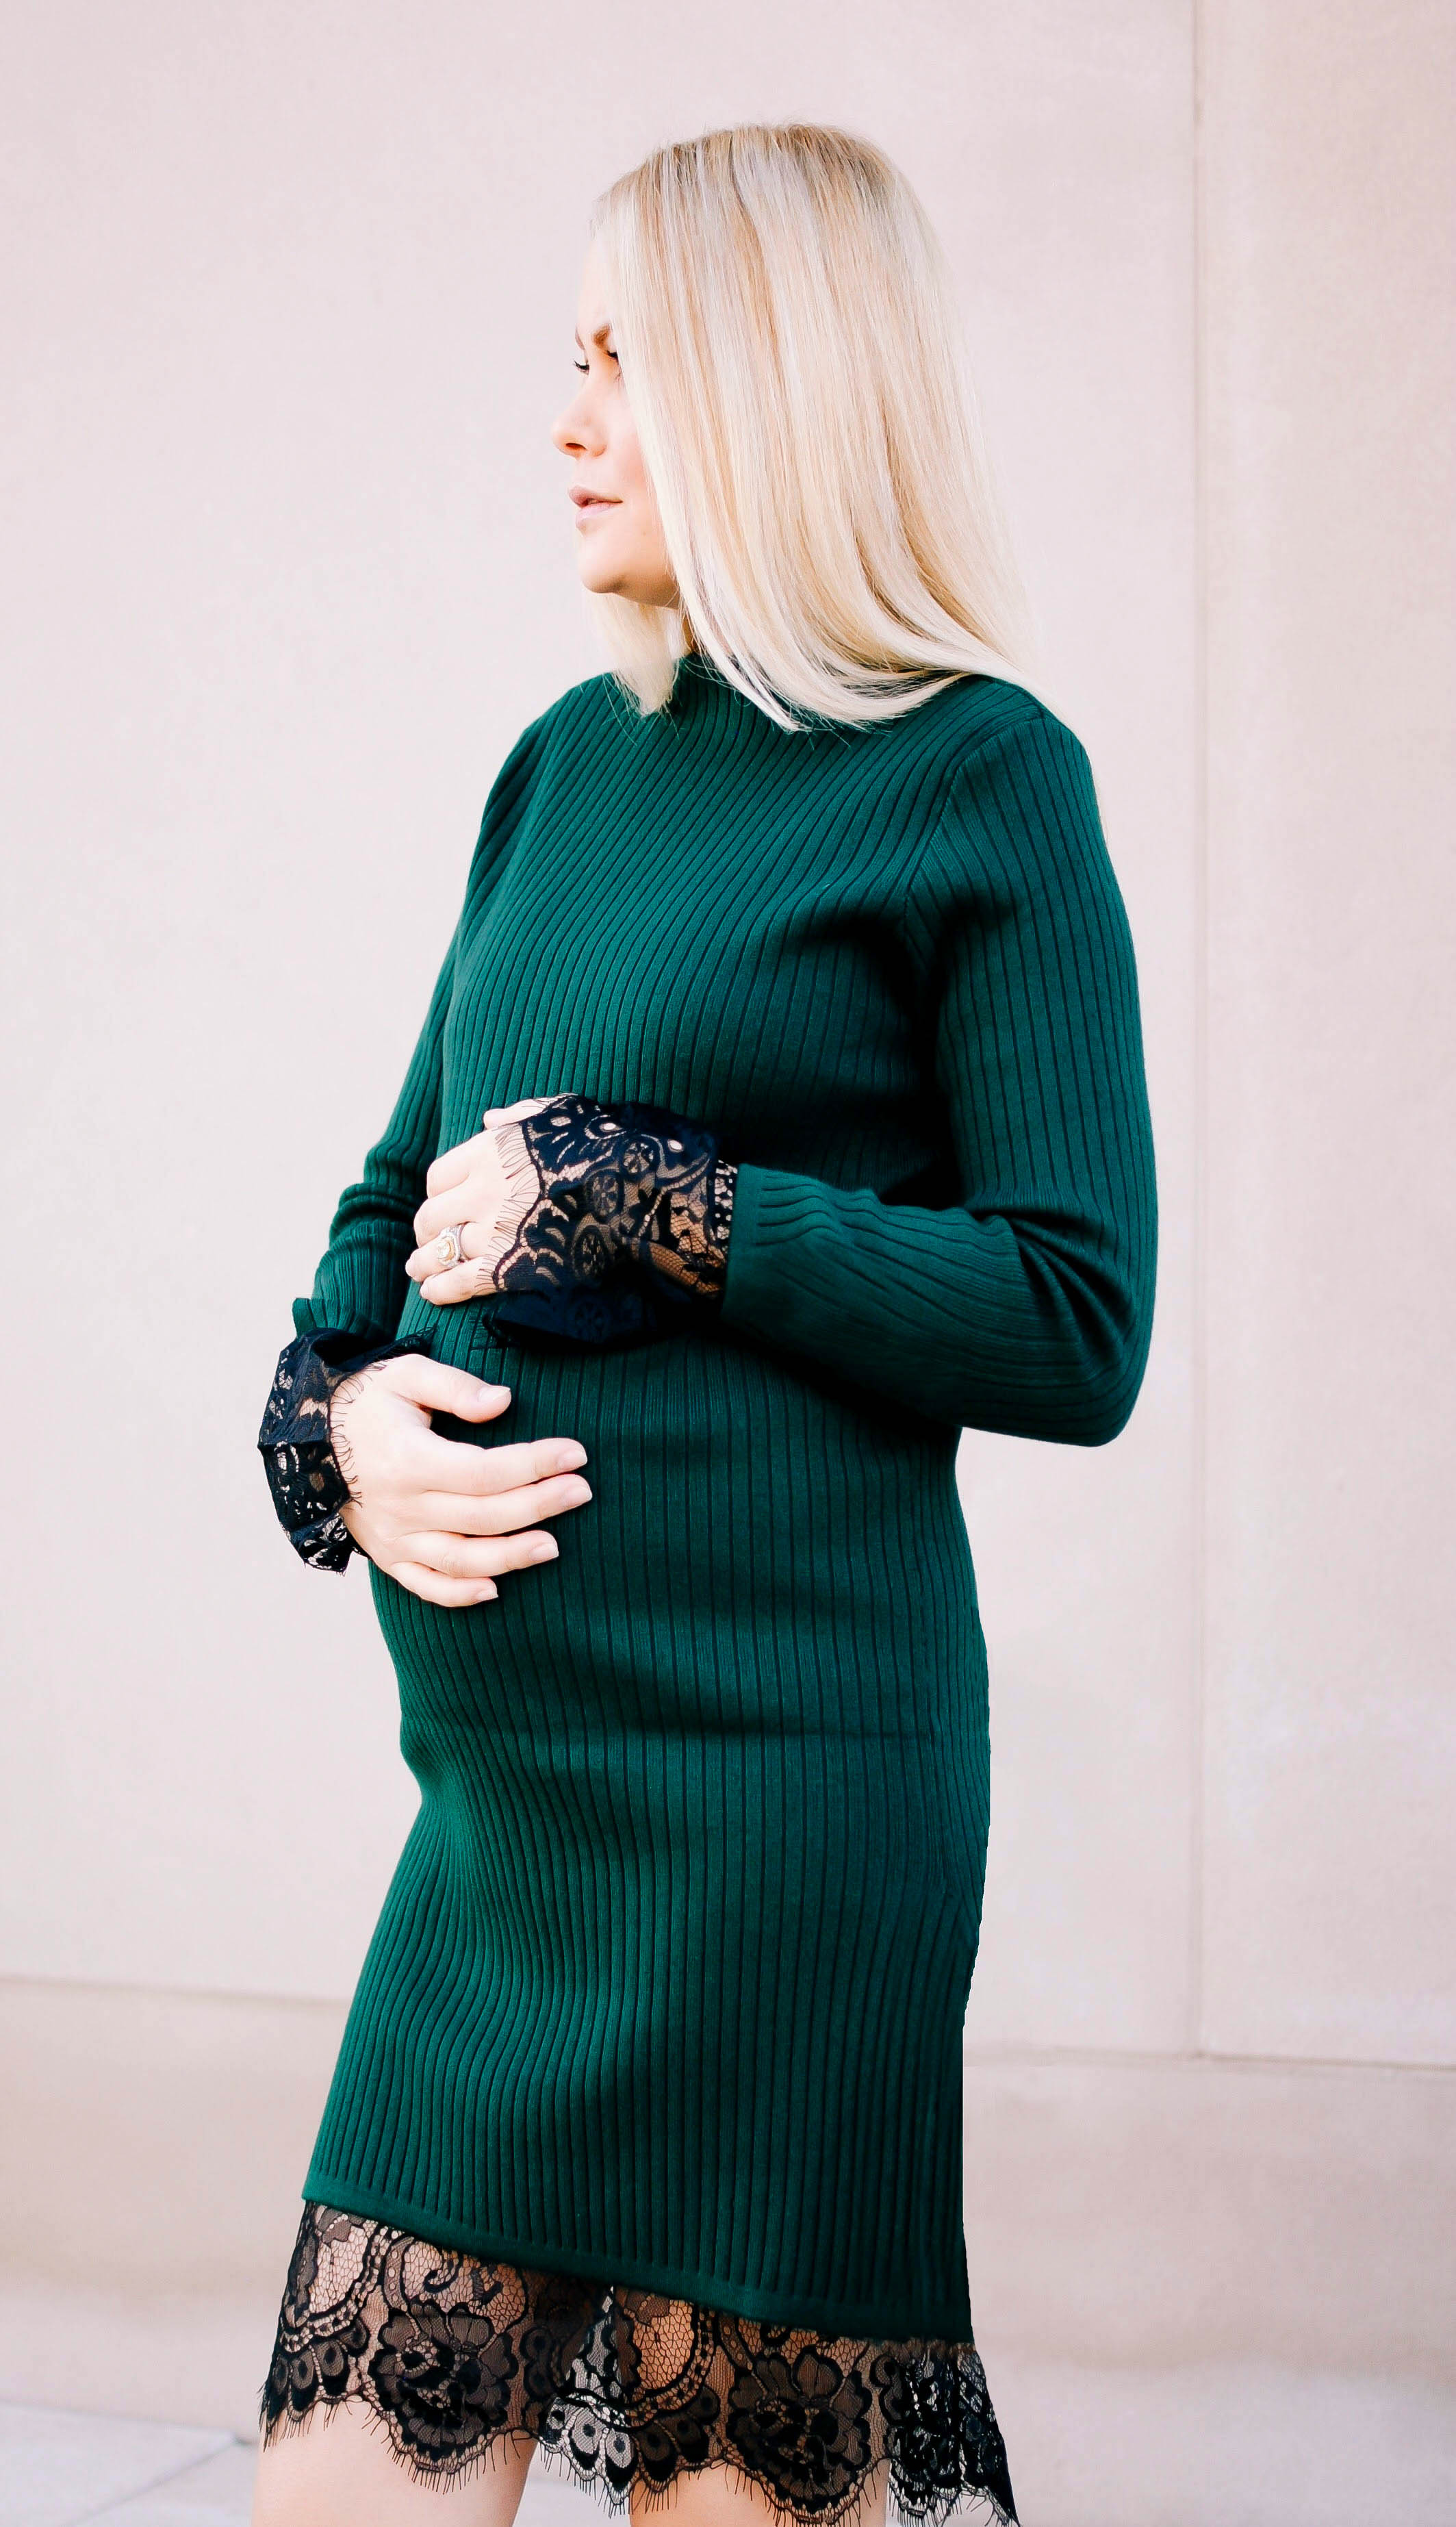 vanessa-lambert-blogger-behind-what-would-v-wear-wears-a-green-sweater-lace-dress-while-31-weeks-pregnant-paired-with-studded-booties_5